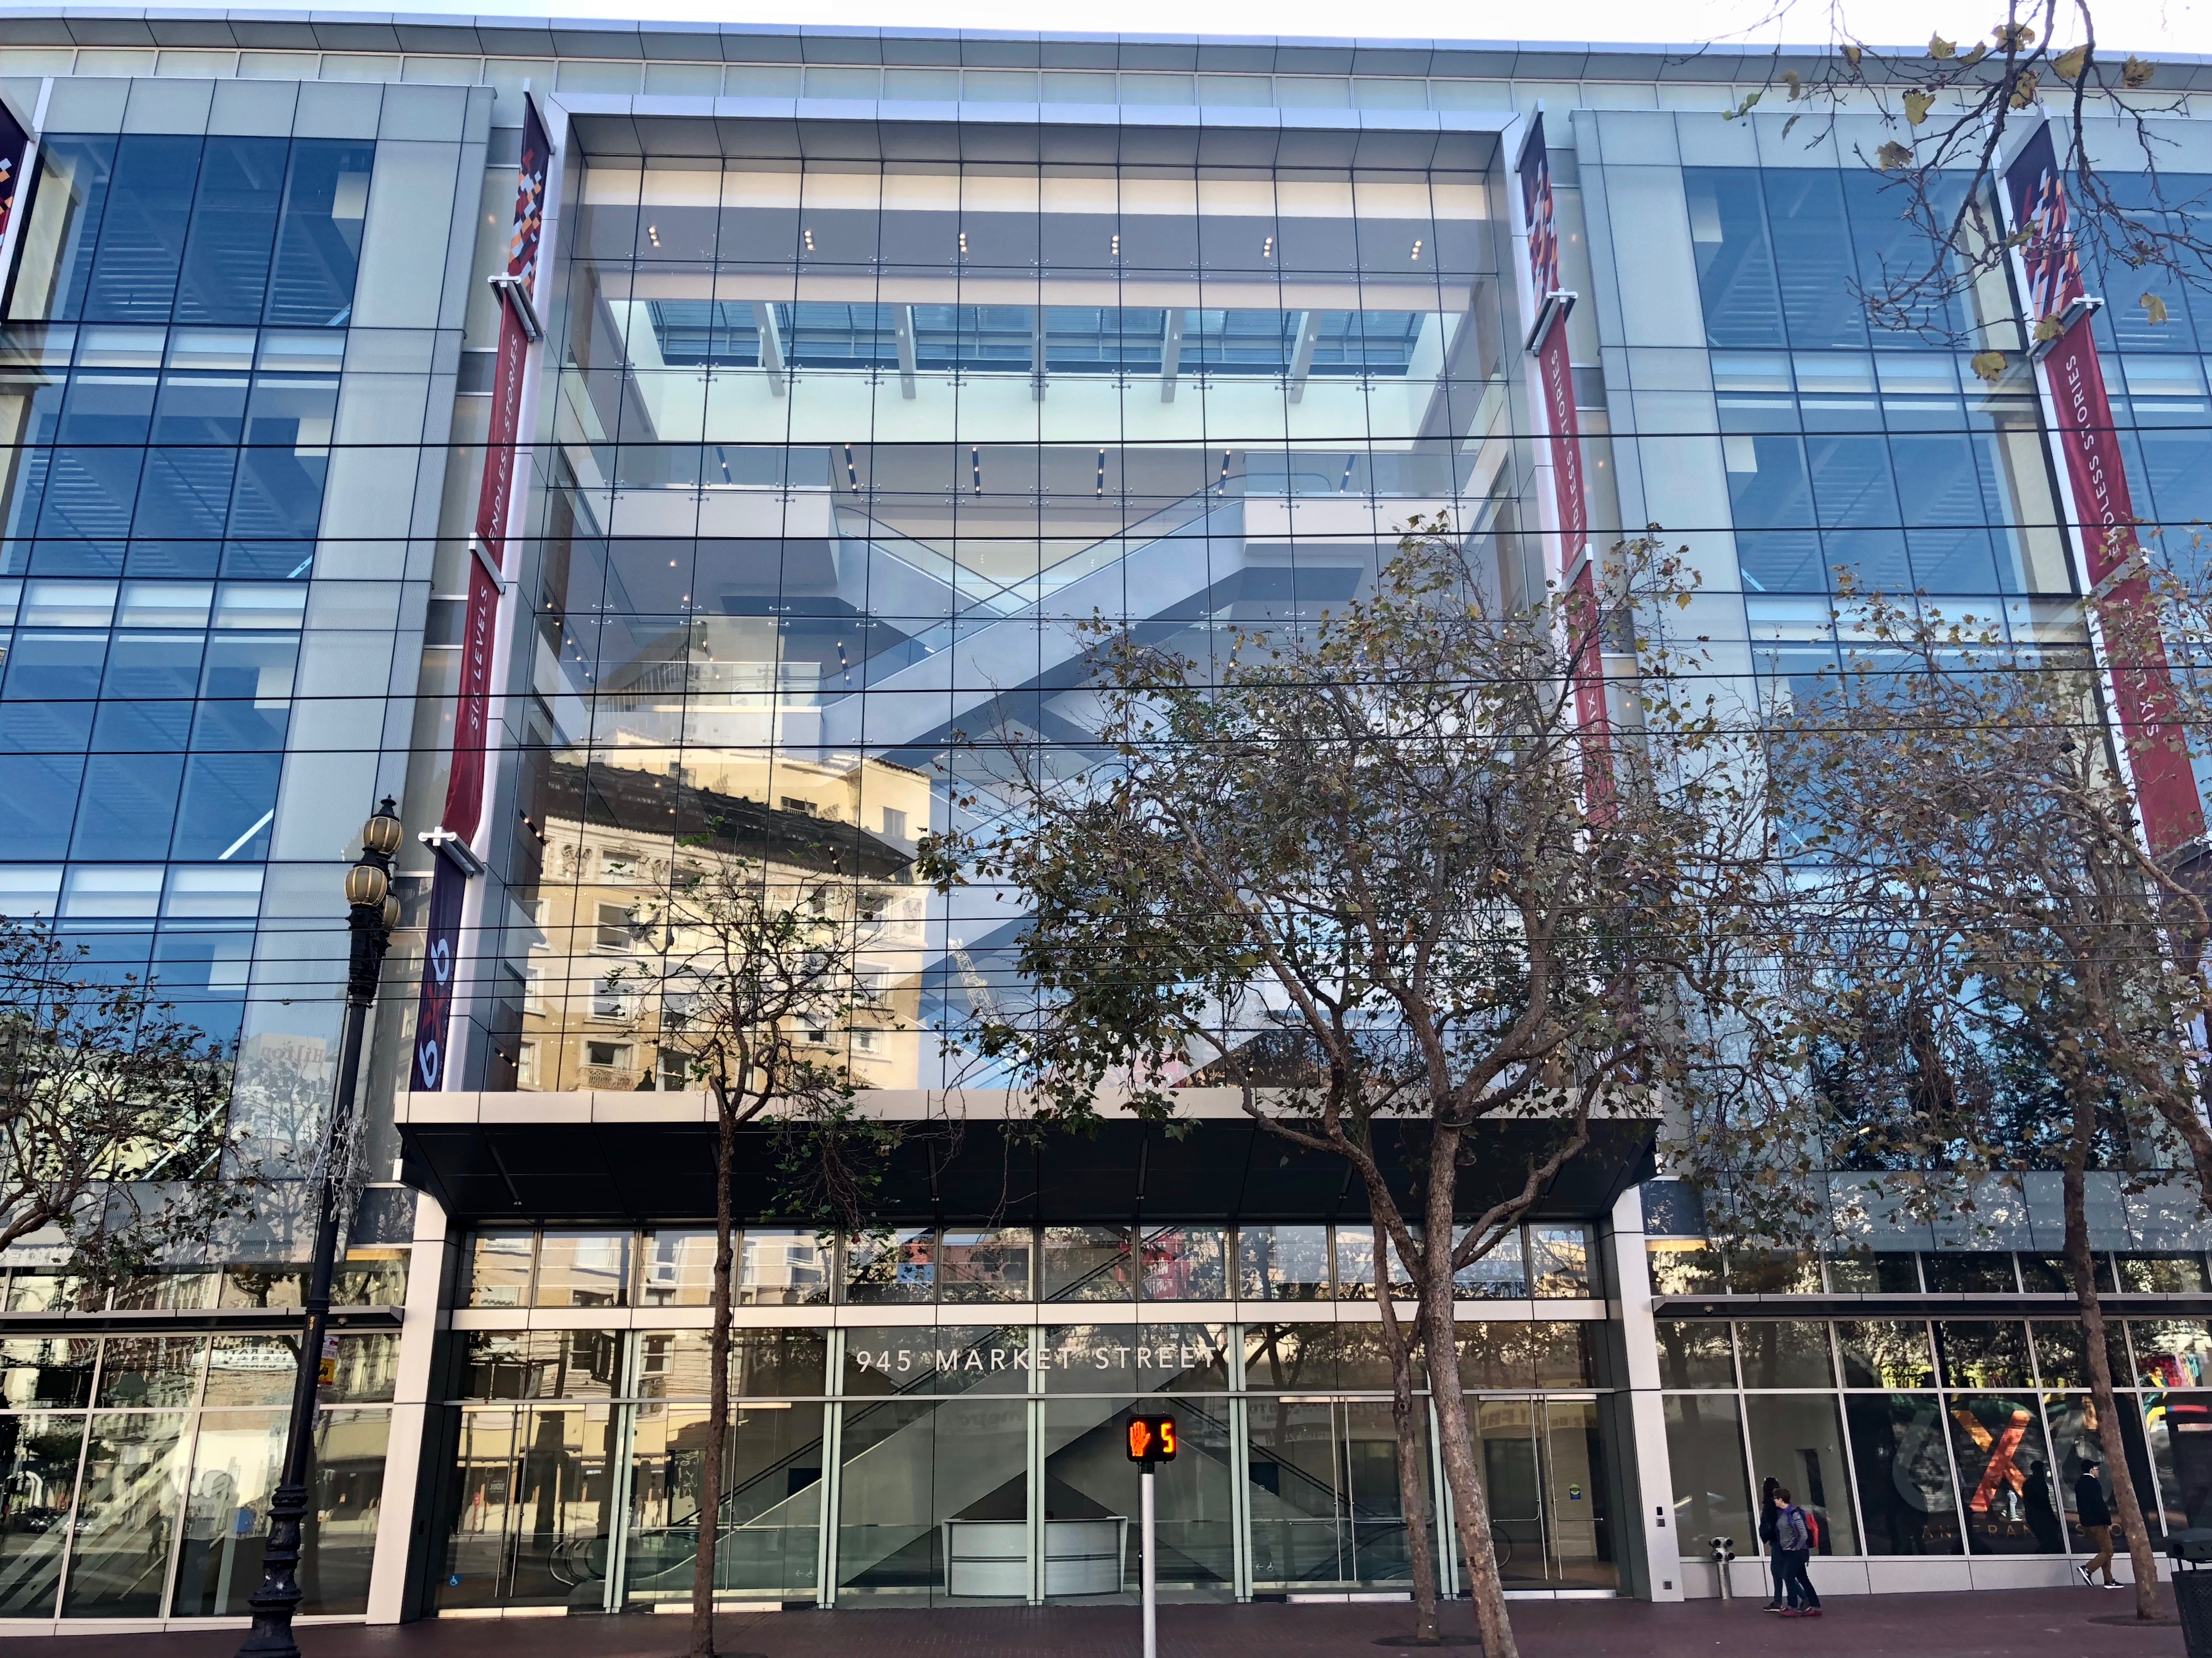 The glass facade of a giant, empty, seven-story building in San Francisco, with criss-crossing escalators visible from the street.